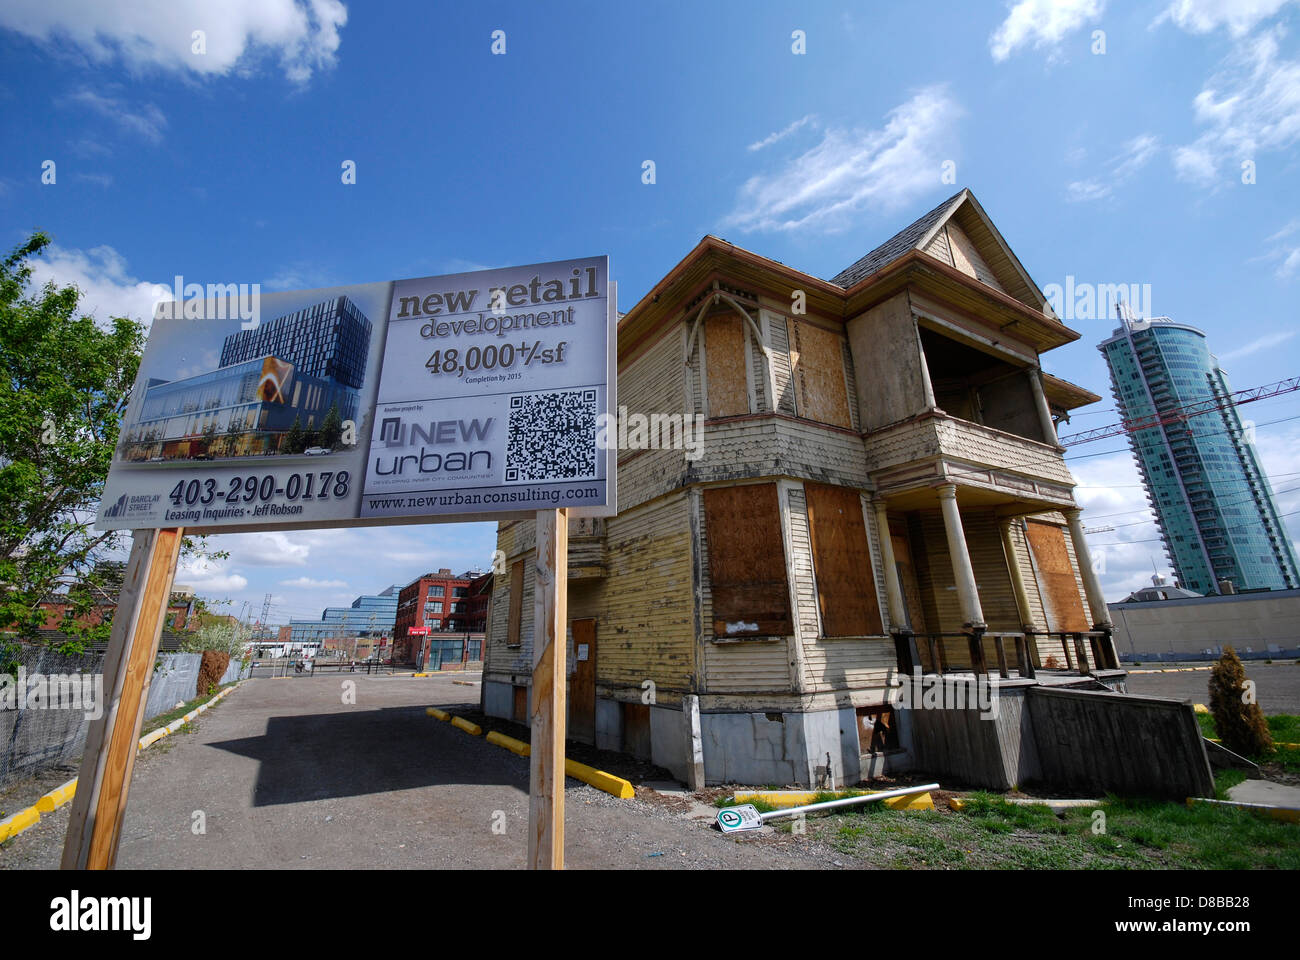 Historic Queen Anne-style house sits on the site of development land in downtown Calgary Alberta Canada Stock Photo